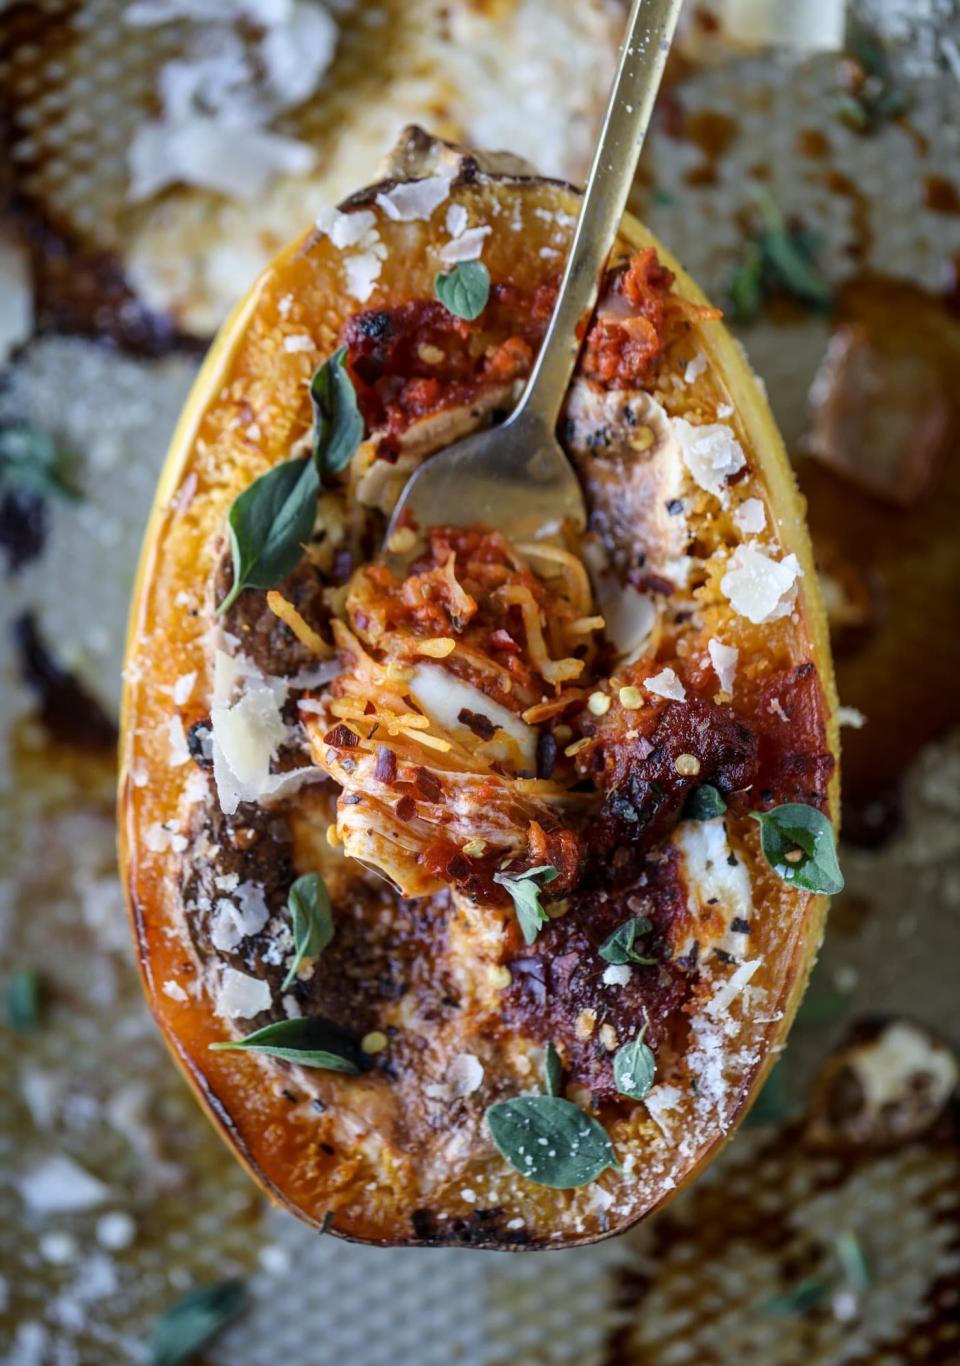 <strong>Get the <a href="https://www.howsweeteats.com/2019/01/spaghetti-squash-parmesan/" target="_blank" rel="noopener noreferrer">Spaghetti Squash Parmesan</a> recipe from How Sweet Eats</strong>